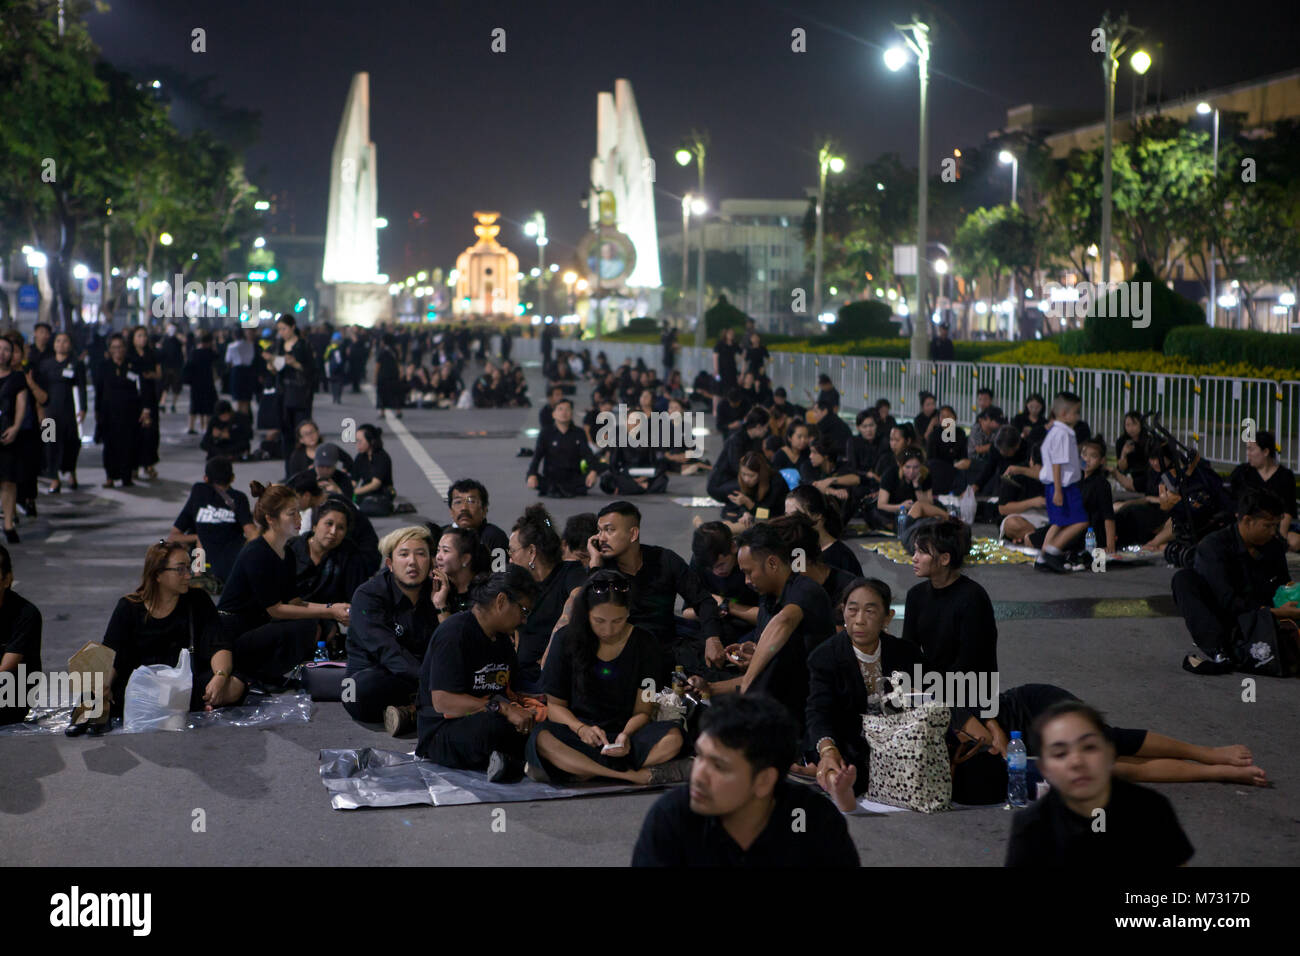 https://c8.alamy.com/comp/M7317D/people-wearing-black-clothes-sitting-in-ratchadamnoen-road-after-the-M7317D.jpg